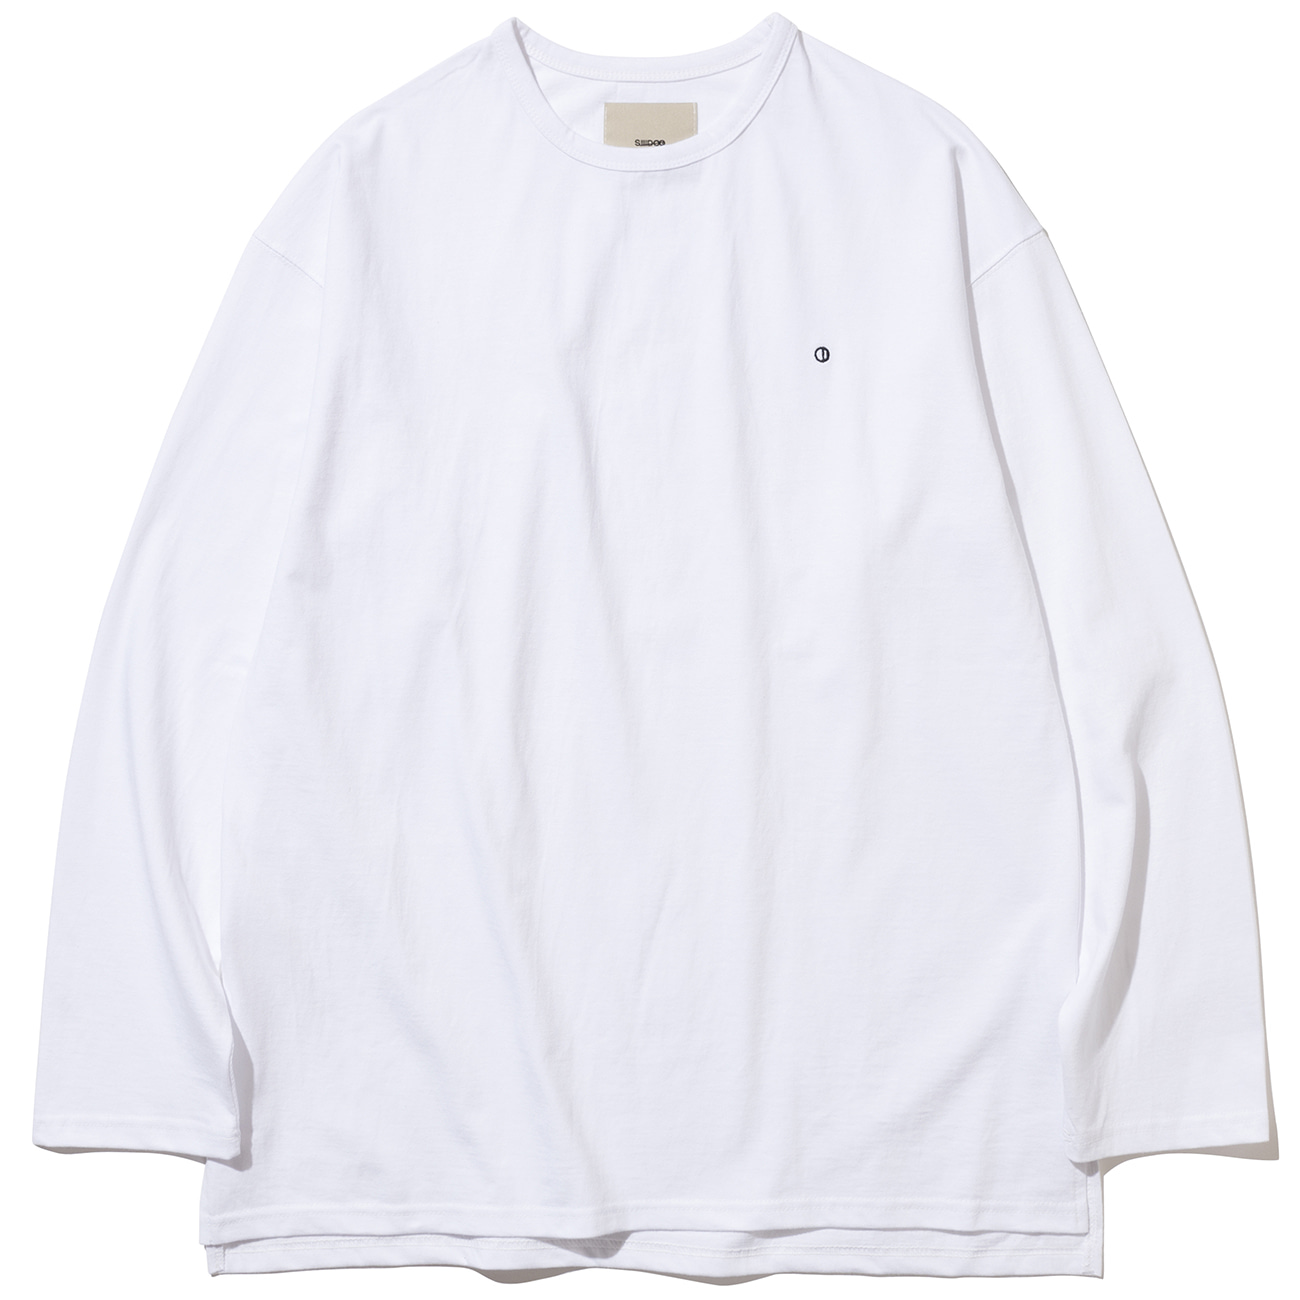 SDDL SIGNATURE BASIC ROUND NECK LONG SLEEVES T #1 (3rd restock)